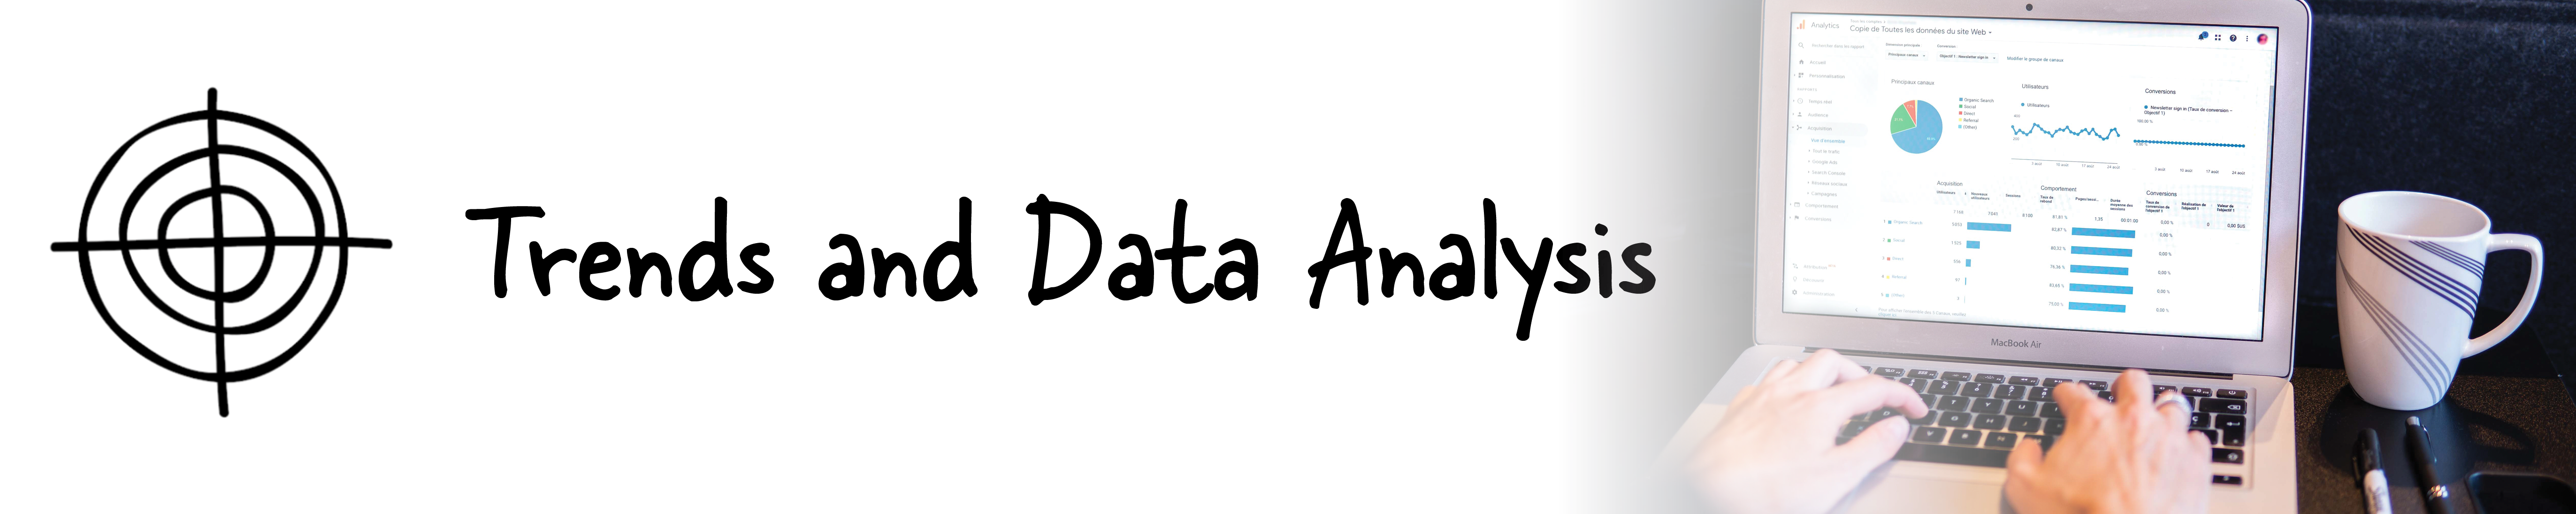 Trends and Data Analysis